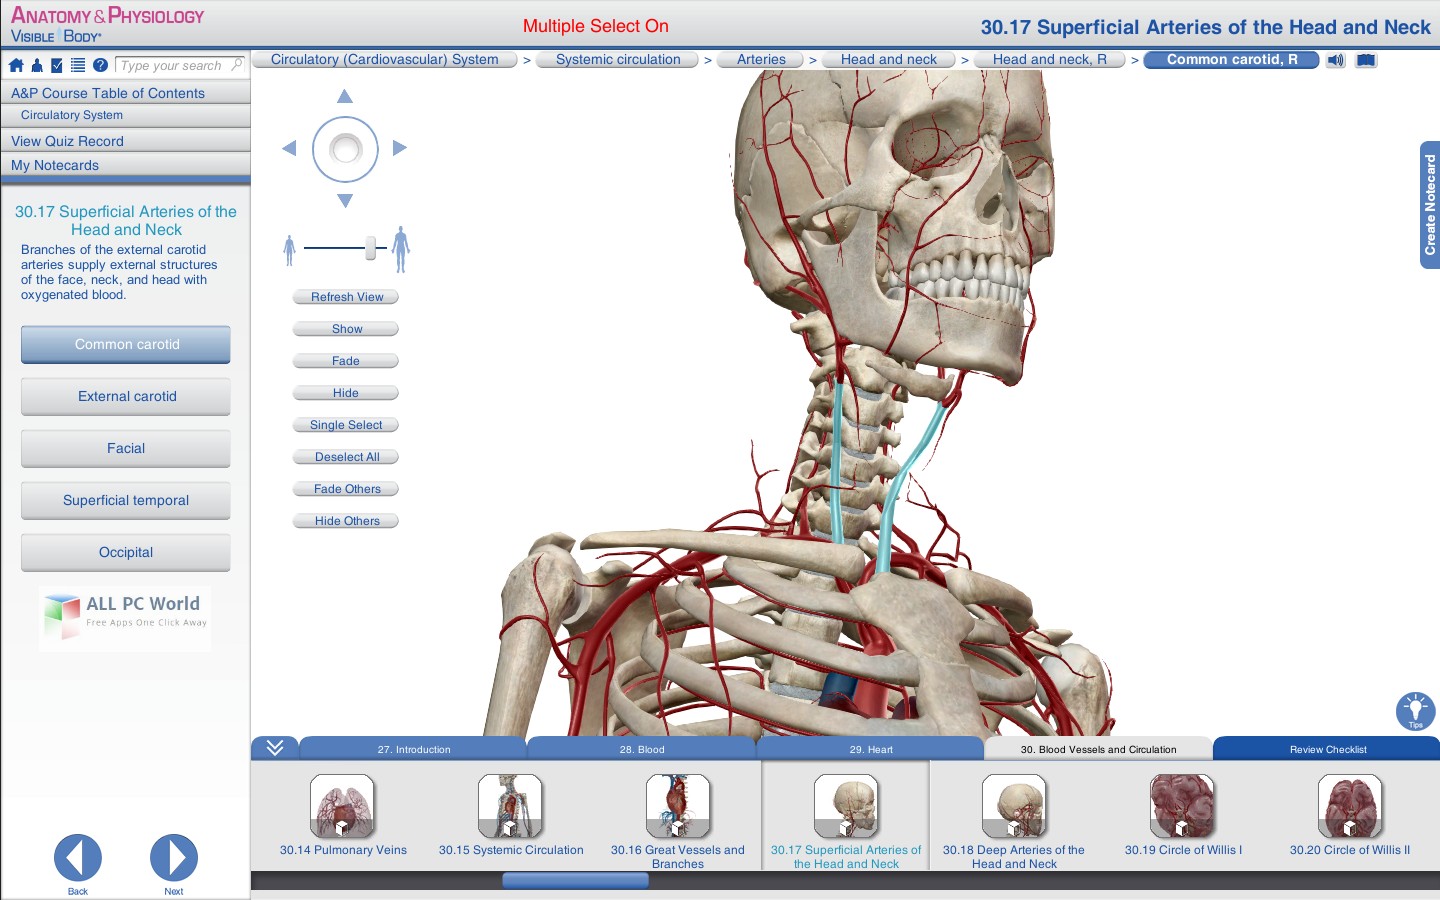 Visible Body Anatomy and Physiology 1.5 Download